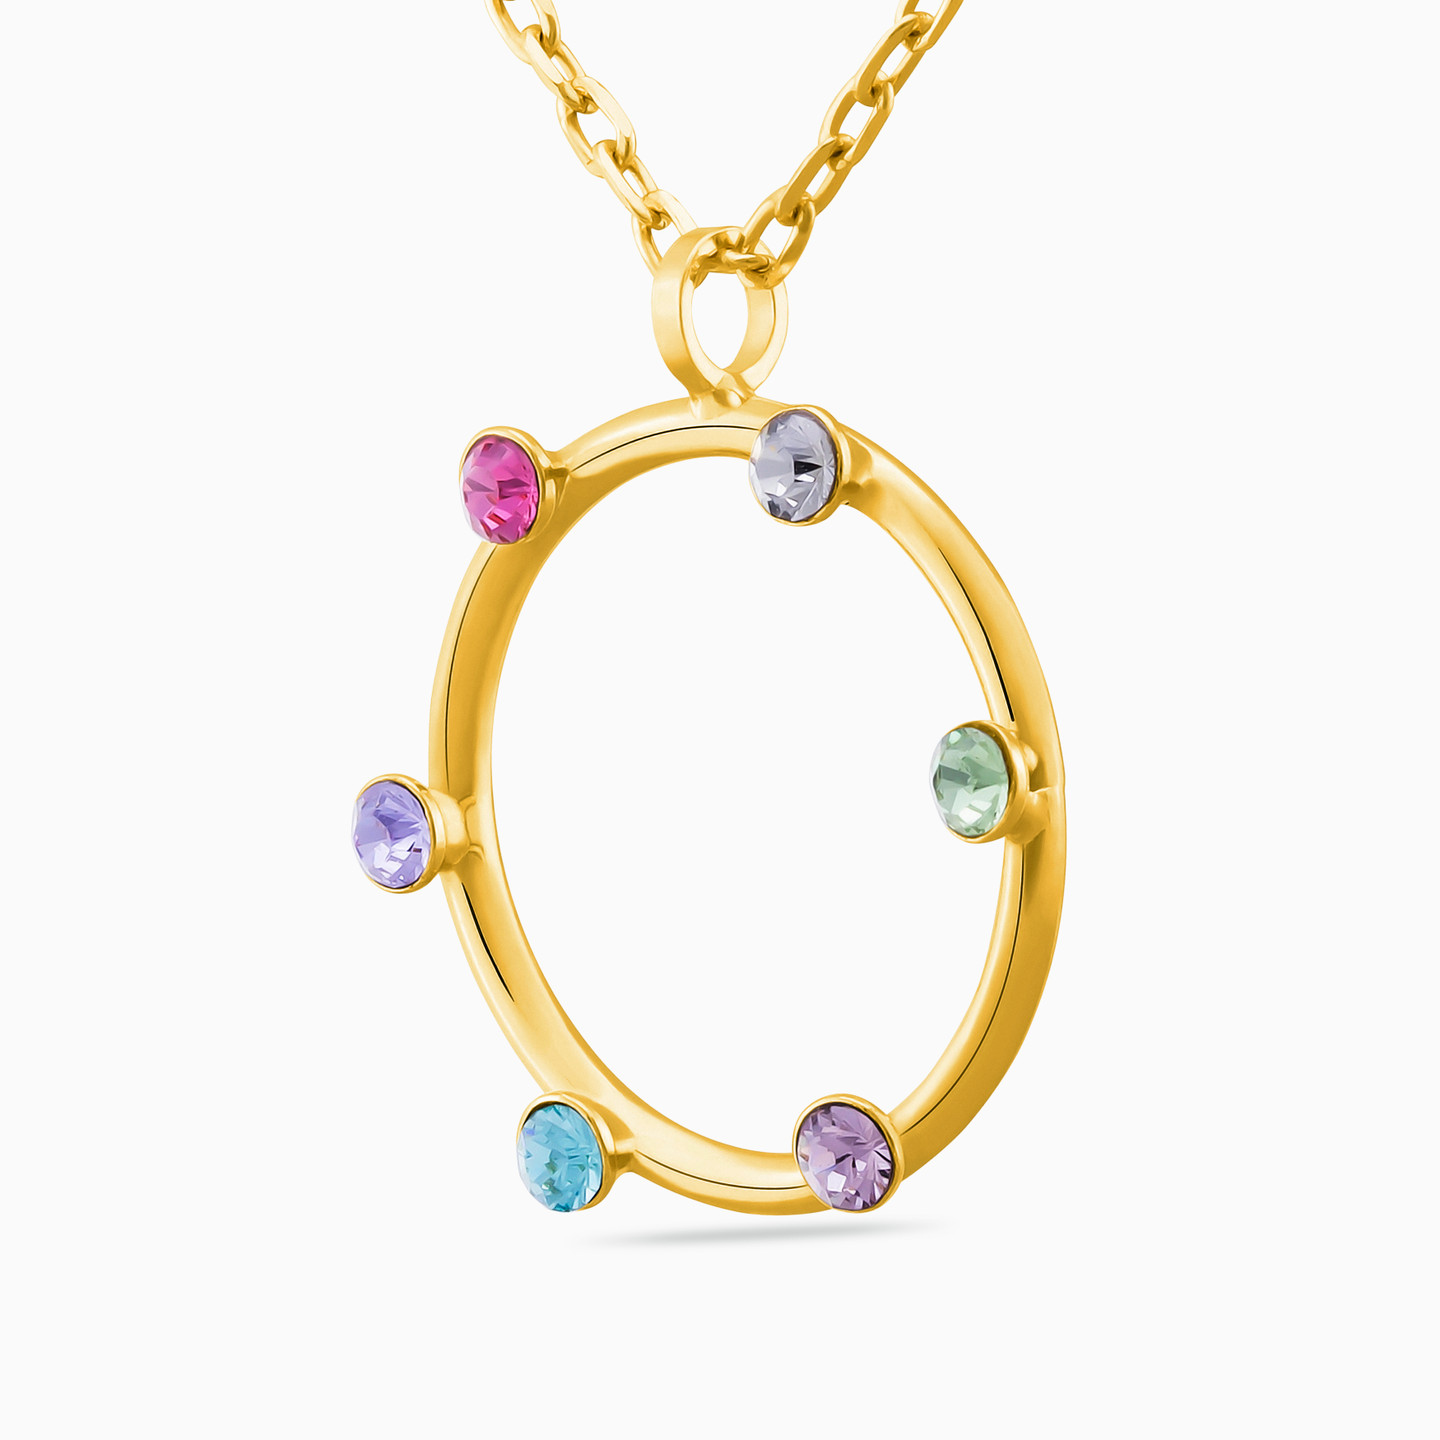 Gold Plated Colored Stones Pendant Necklace - 2